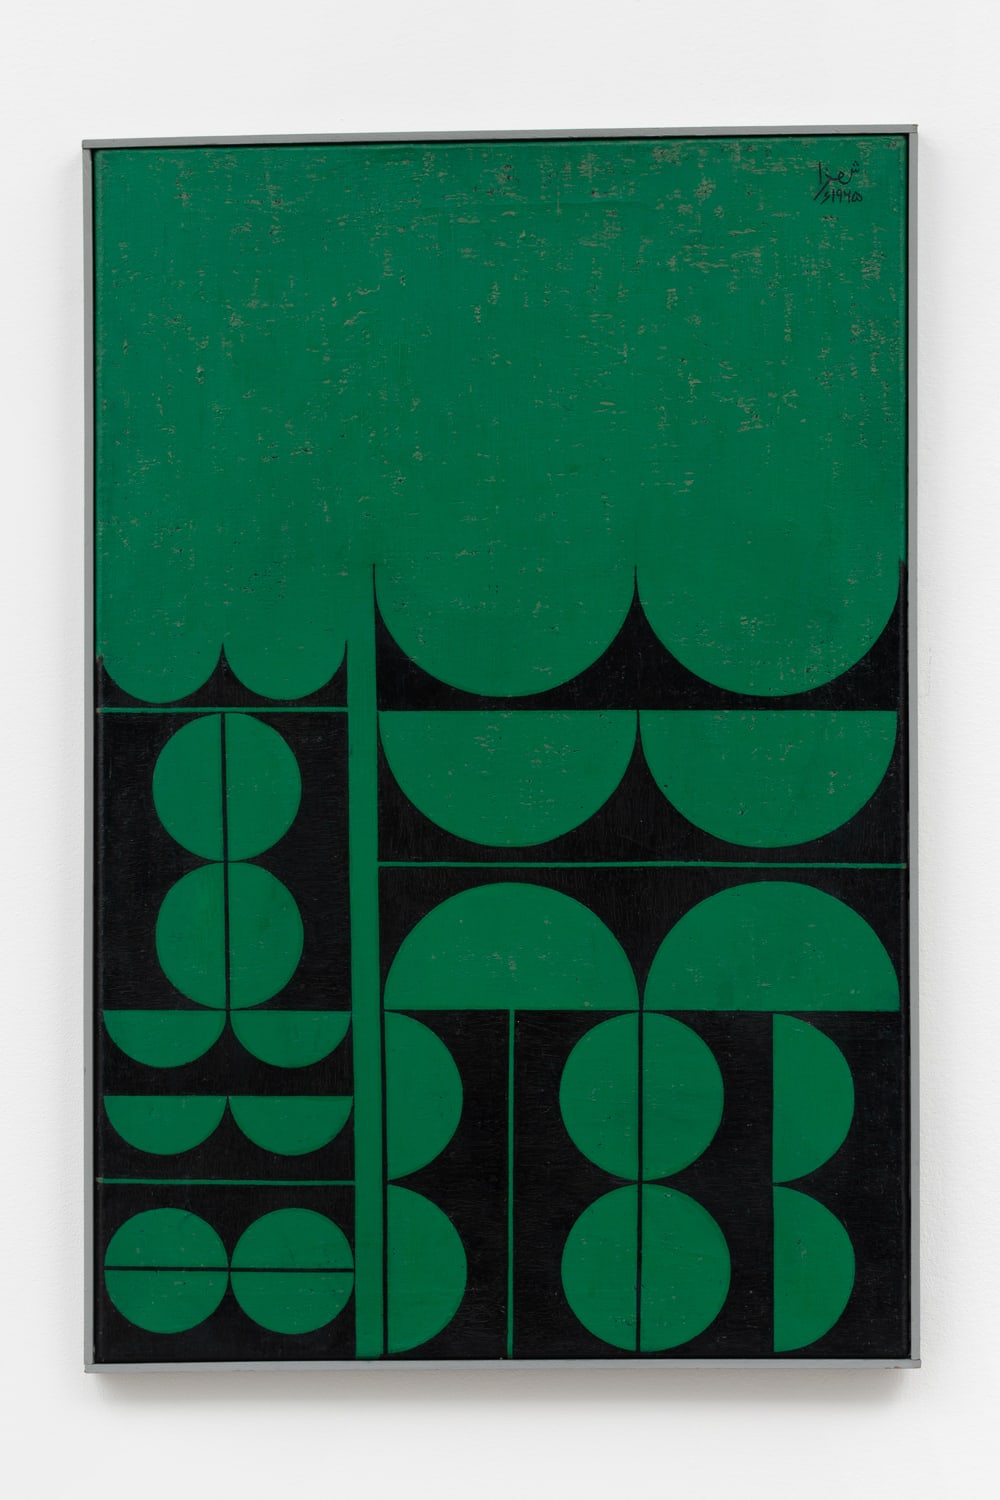 Anwar Jalal Shemza, Composition in Green and Black, 1965